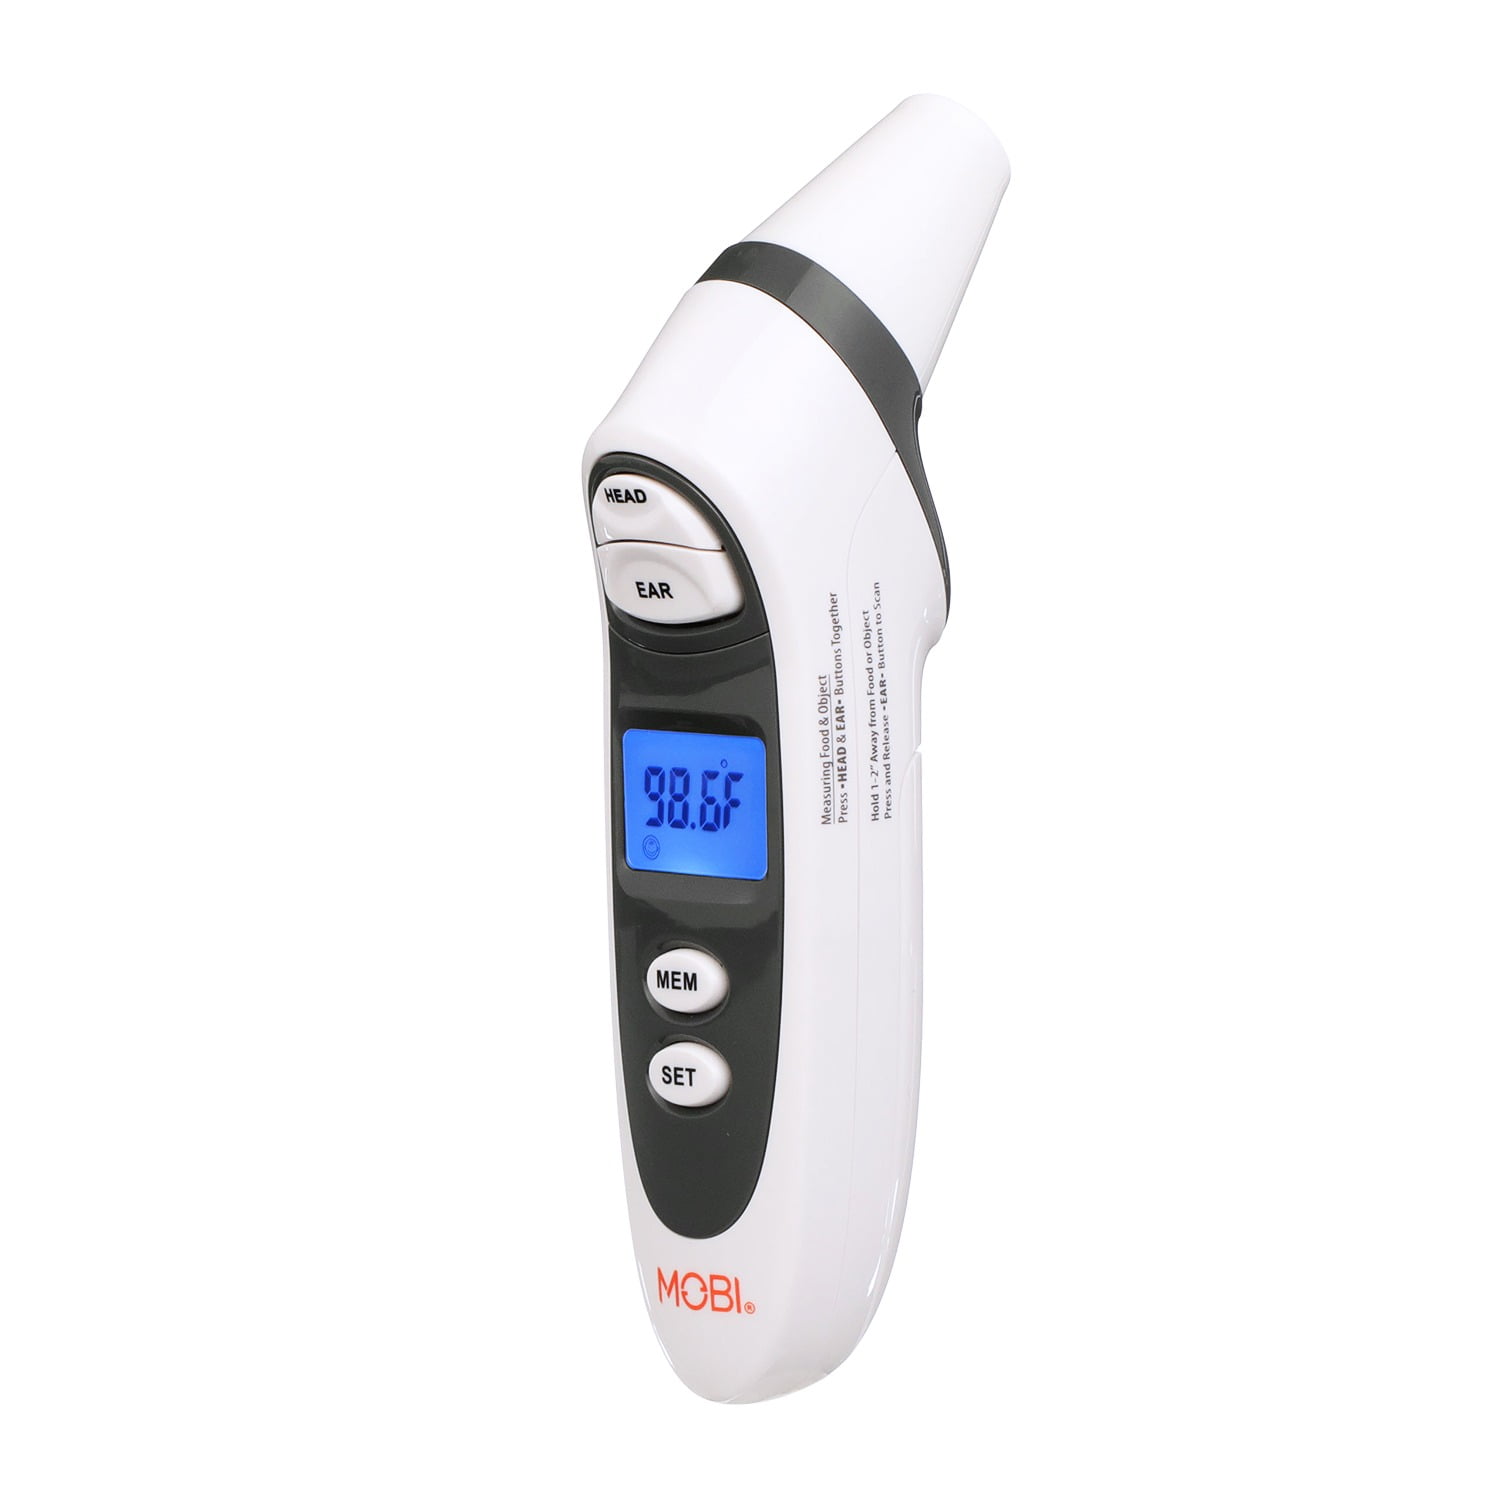 with Buzzing Sound The Reading is Clearer 1 Piece Veterinary Digital Thermometer for Livestock Animals with LCD Screen 